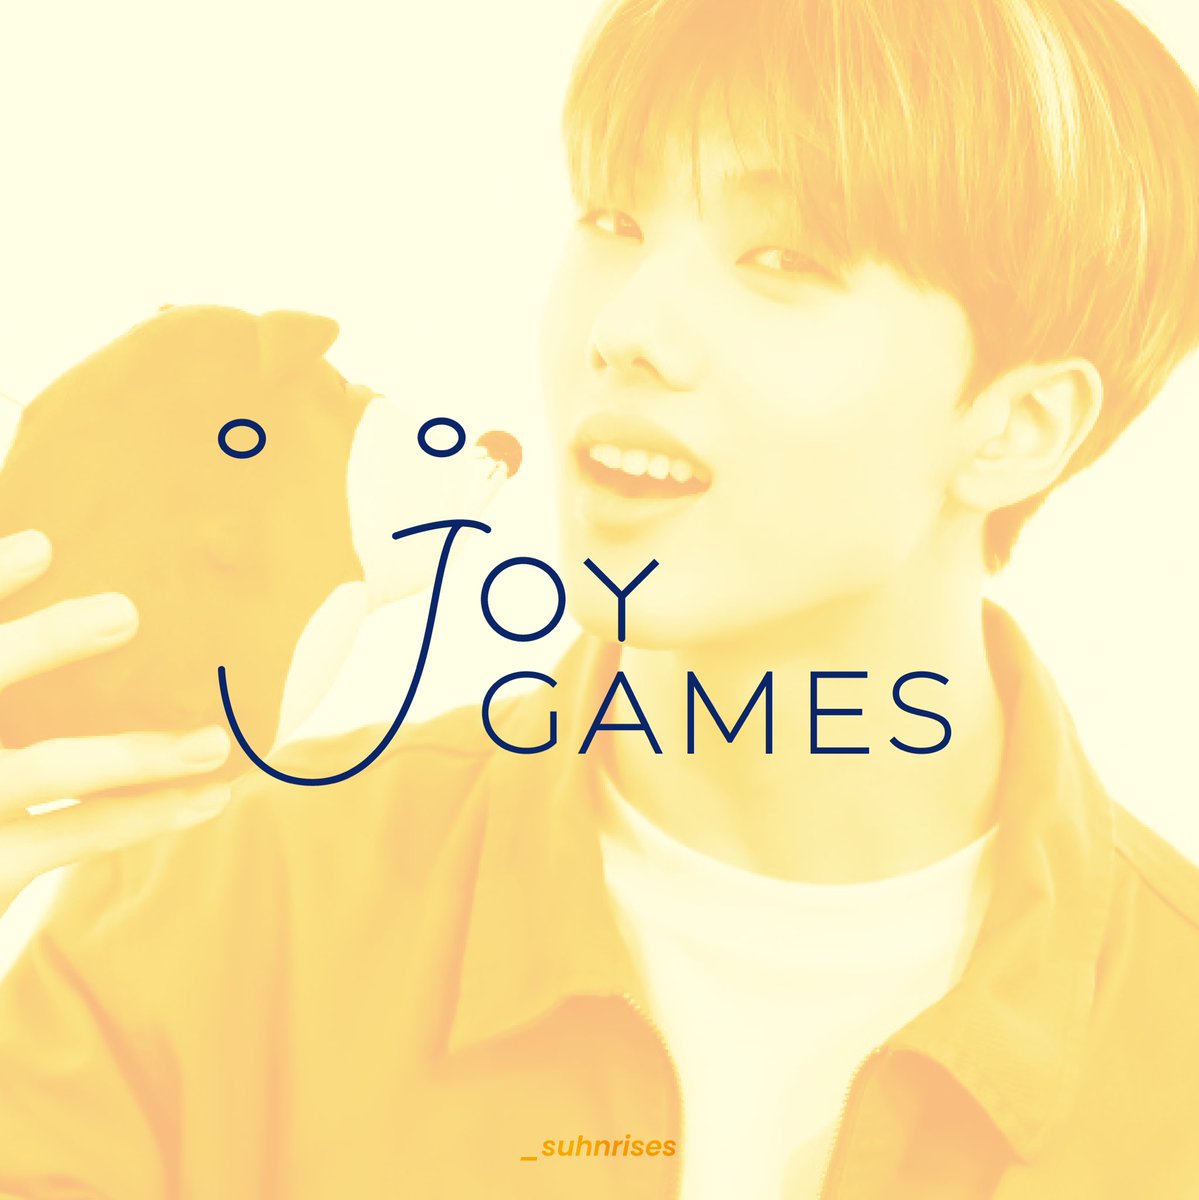 jisung: joy games- mobile games developer !!- joy is def a nod to the song joy (which also conveniently starts with j)- the j in joy is also part of a smiley face bc his games make u smile